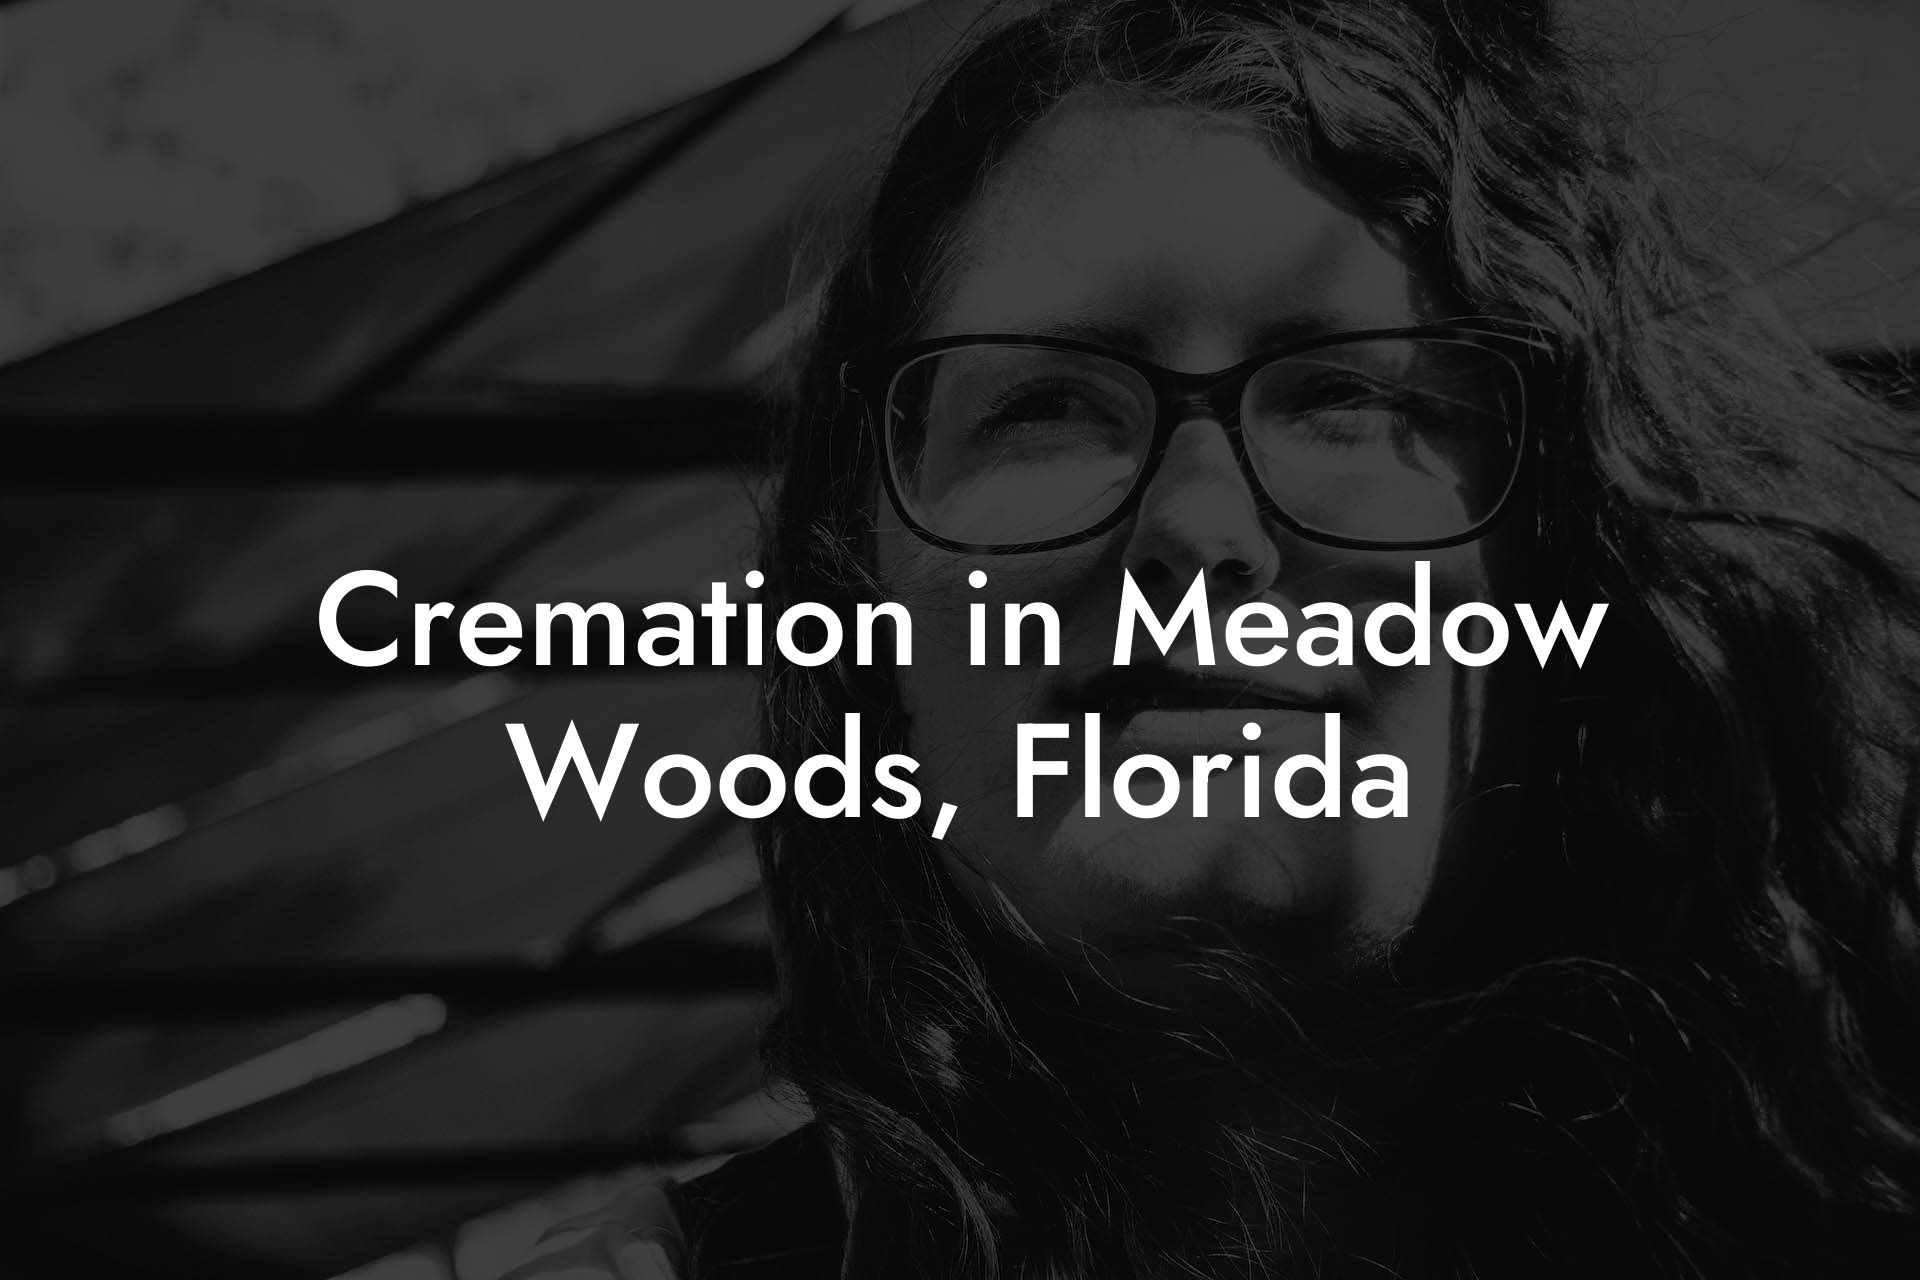 Cremation in Meadow Woods, Florida